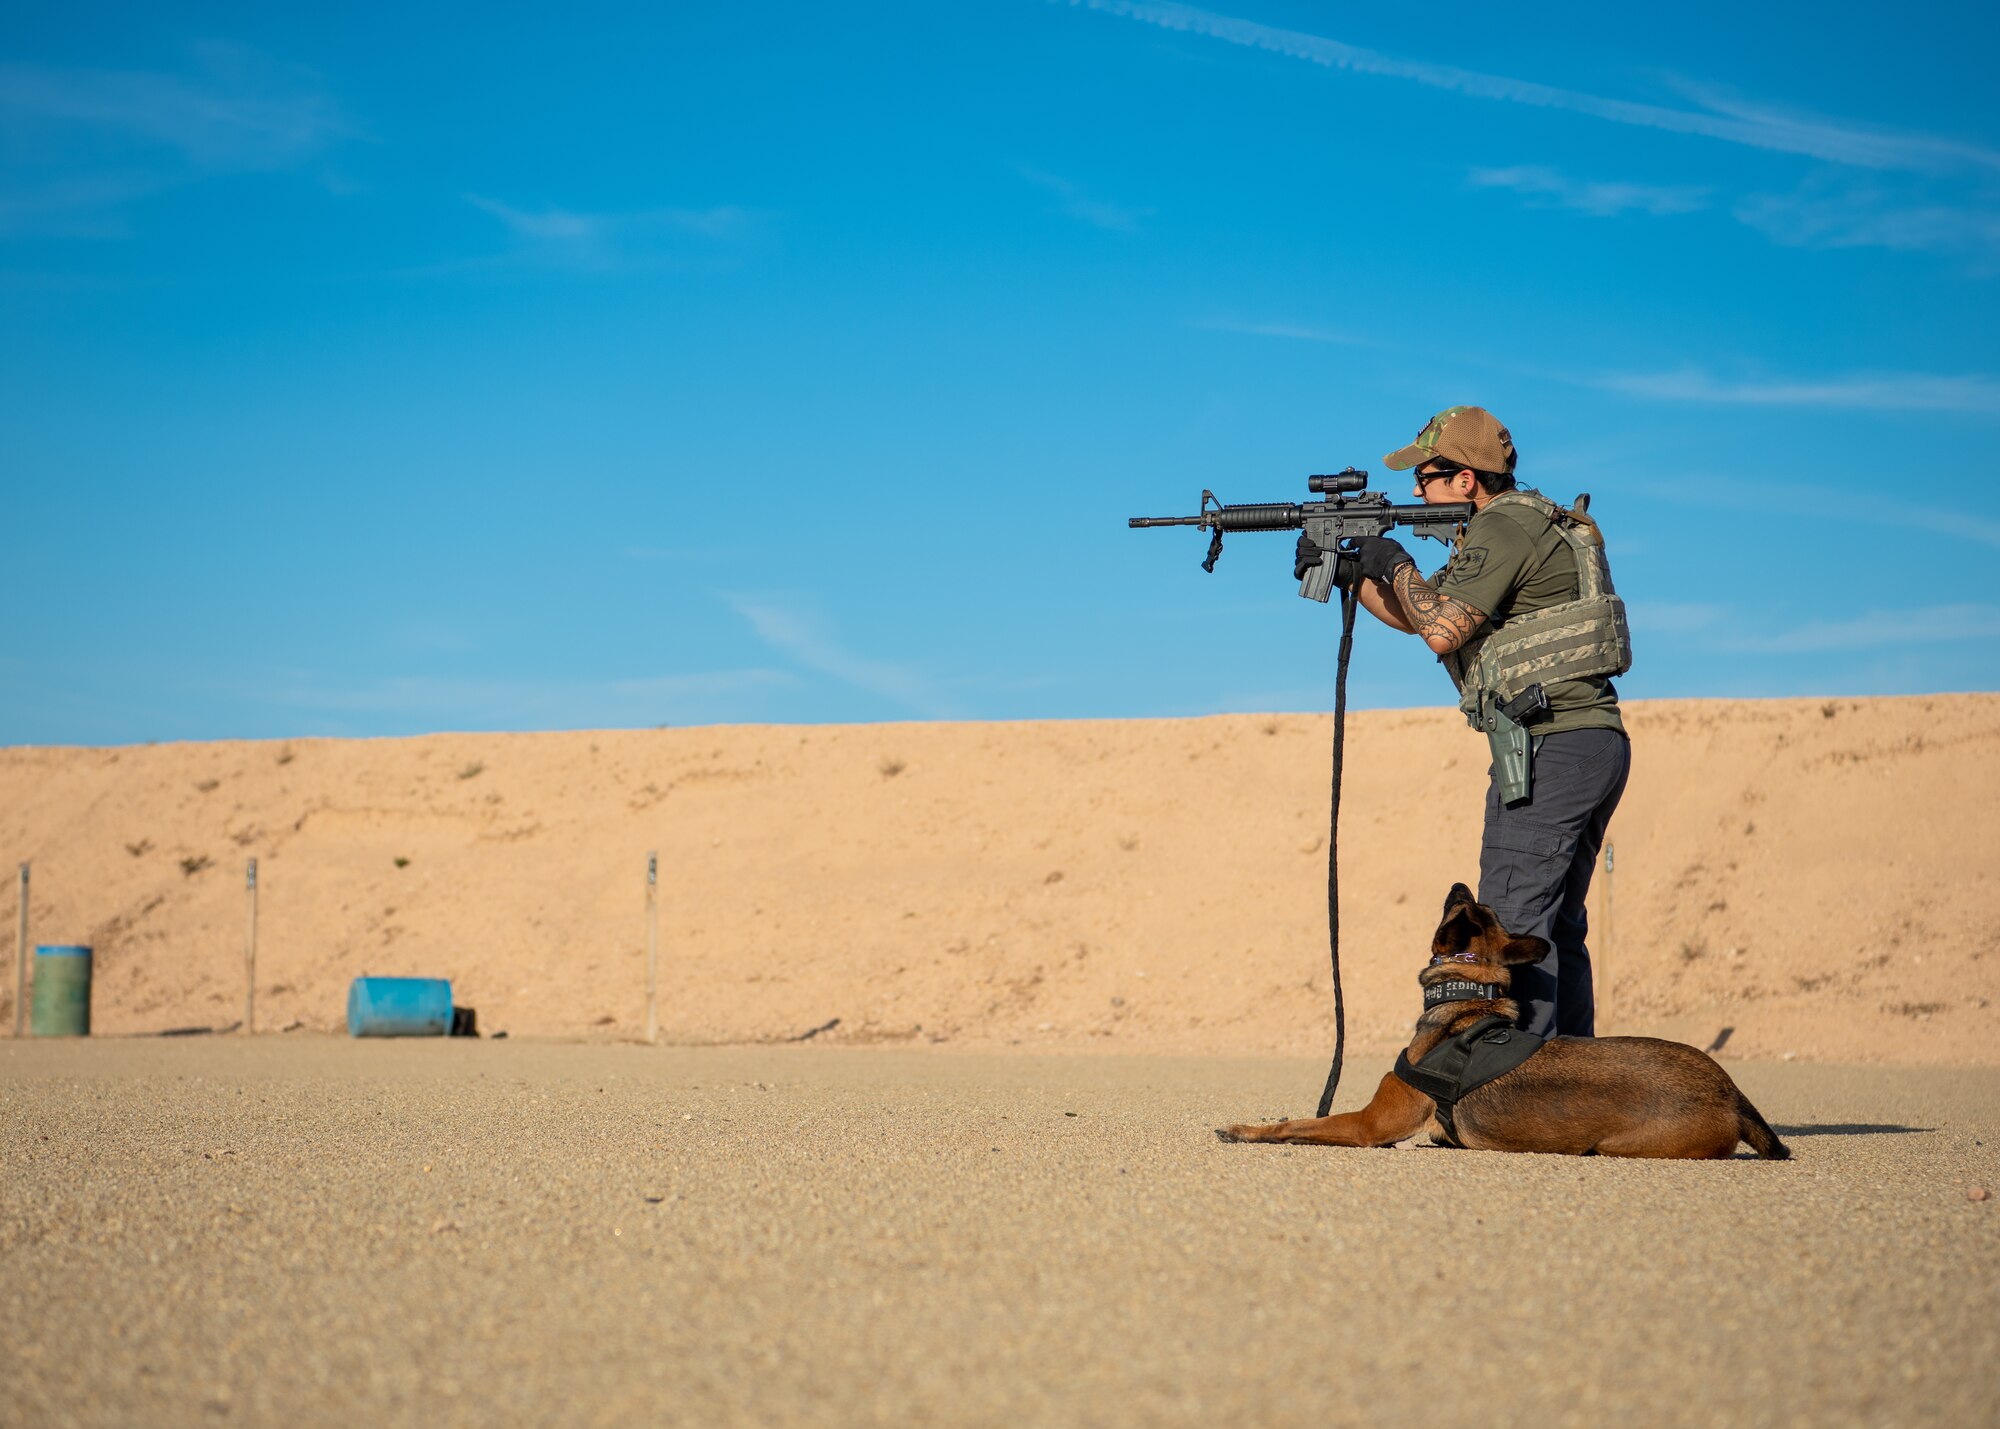 Staff Sgt. Elizabeth Pedroza, 56th Security Forces Squadron military working dog handler, familiarizes Frida, an MWD, with the sound of gun fire Aug. 2, 2019, in Surprise, Ariz.